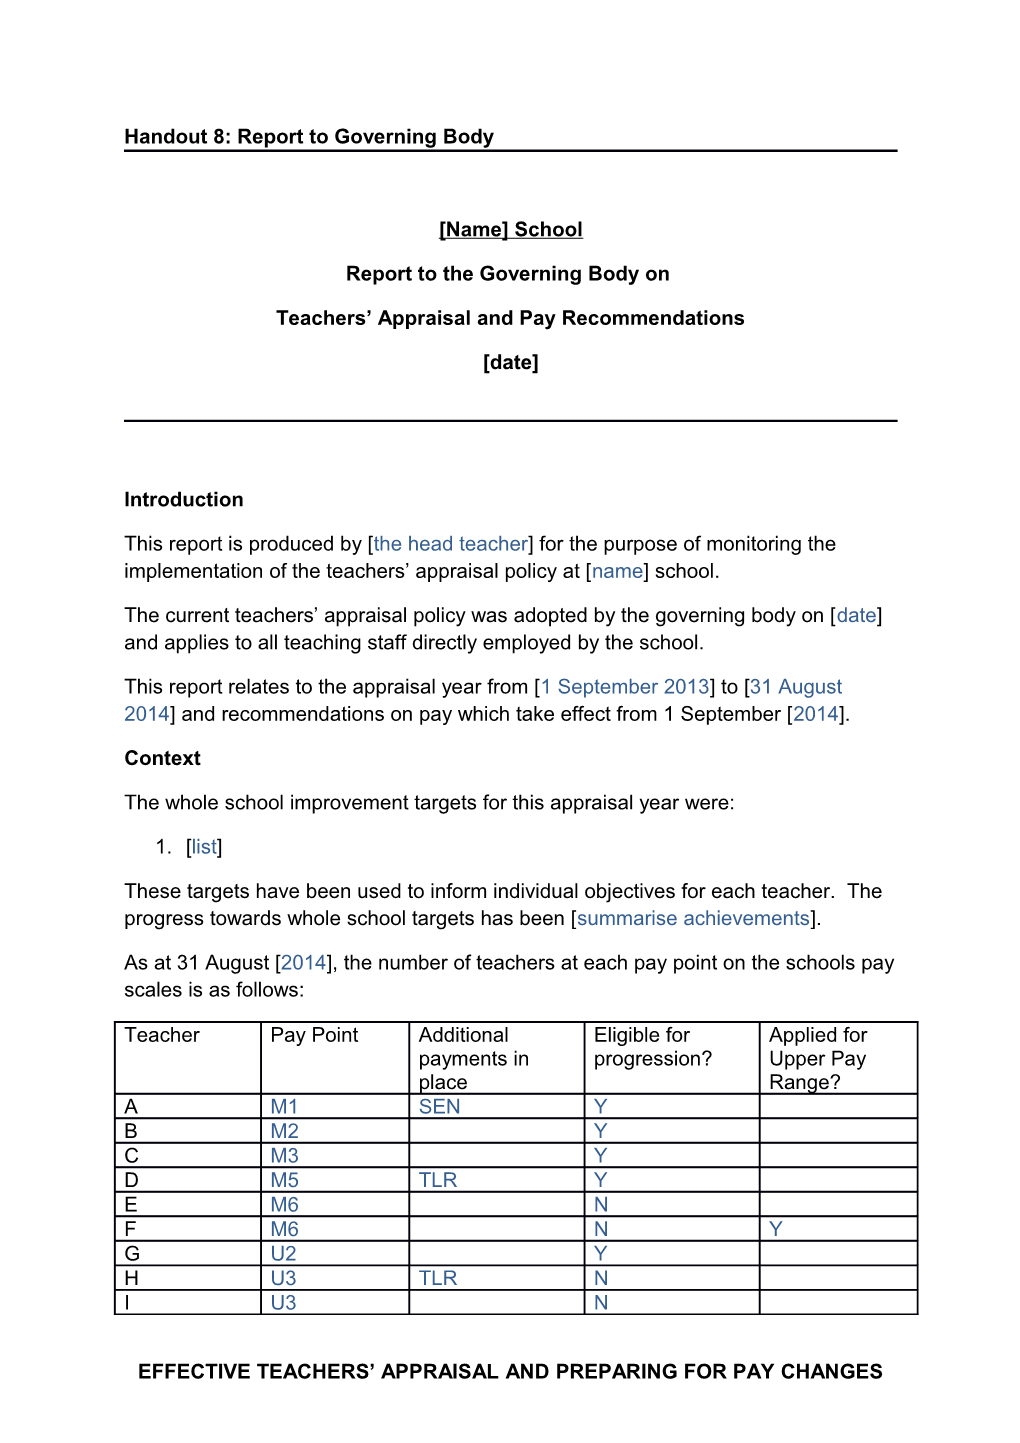 Handout 8: Report to Governing Body